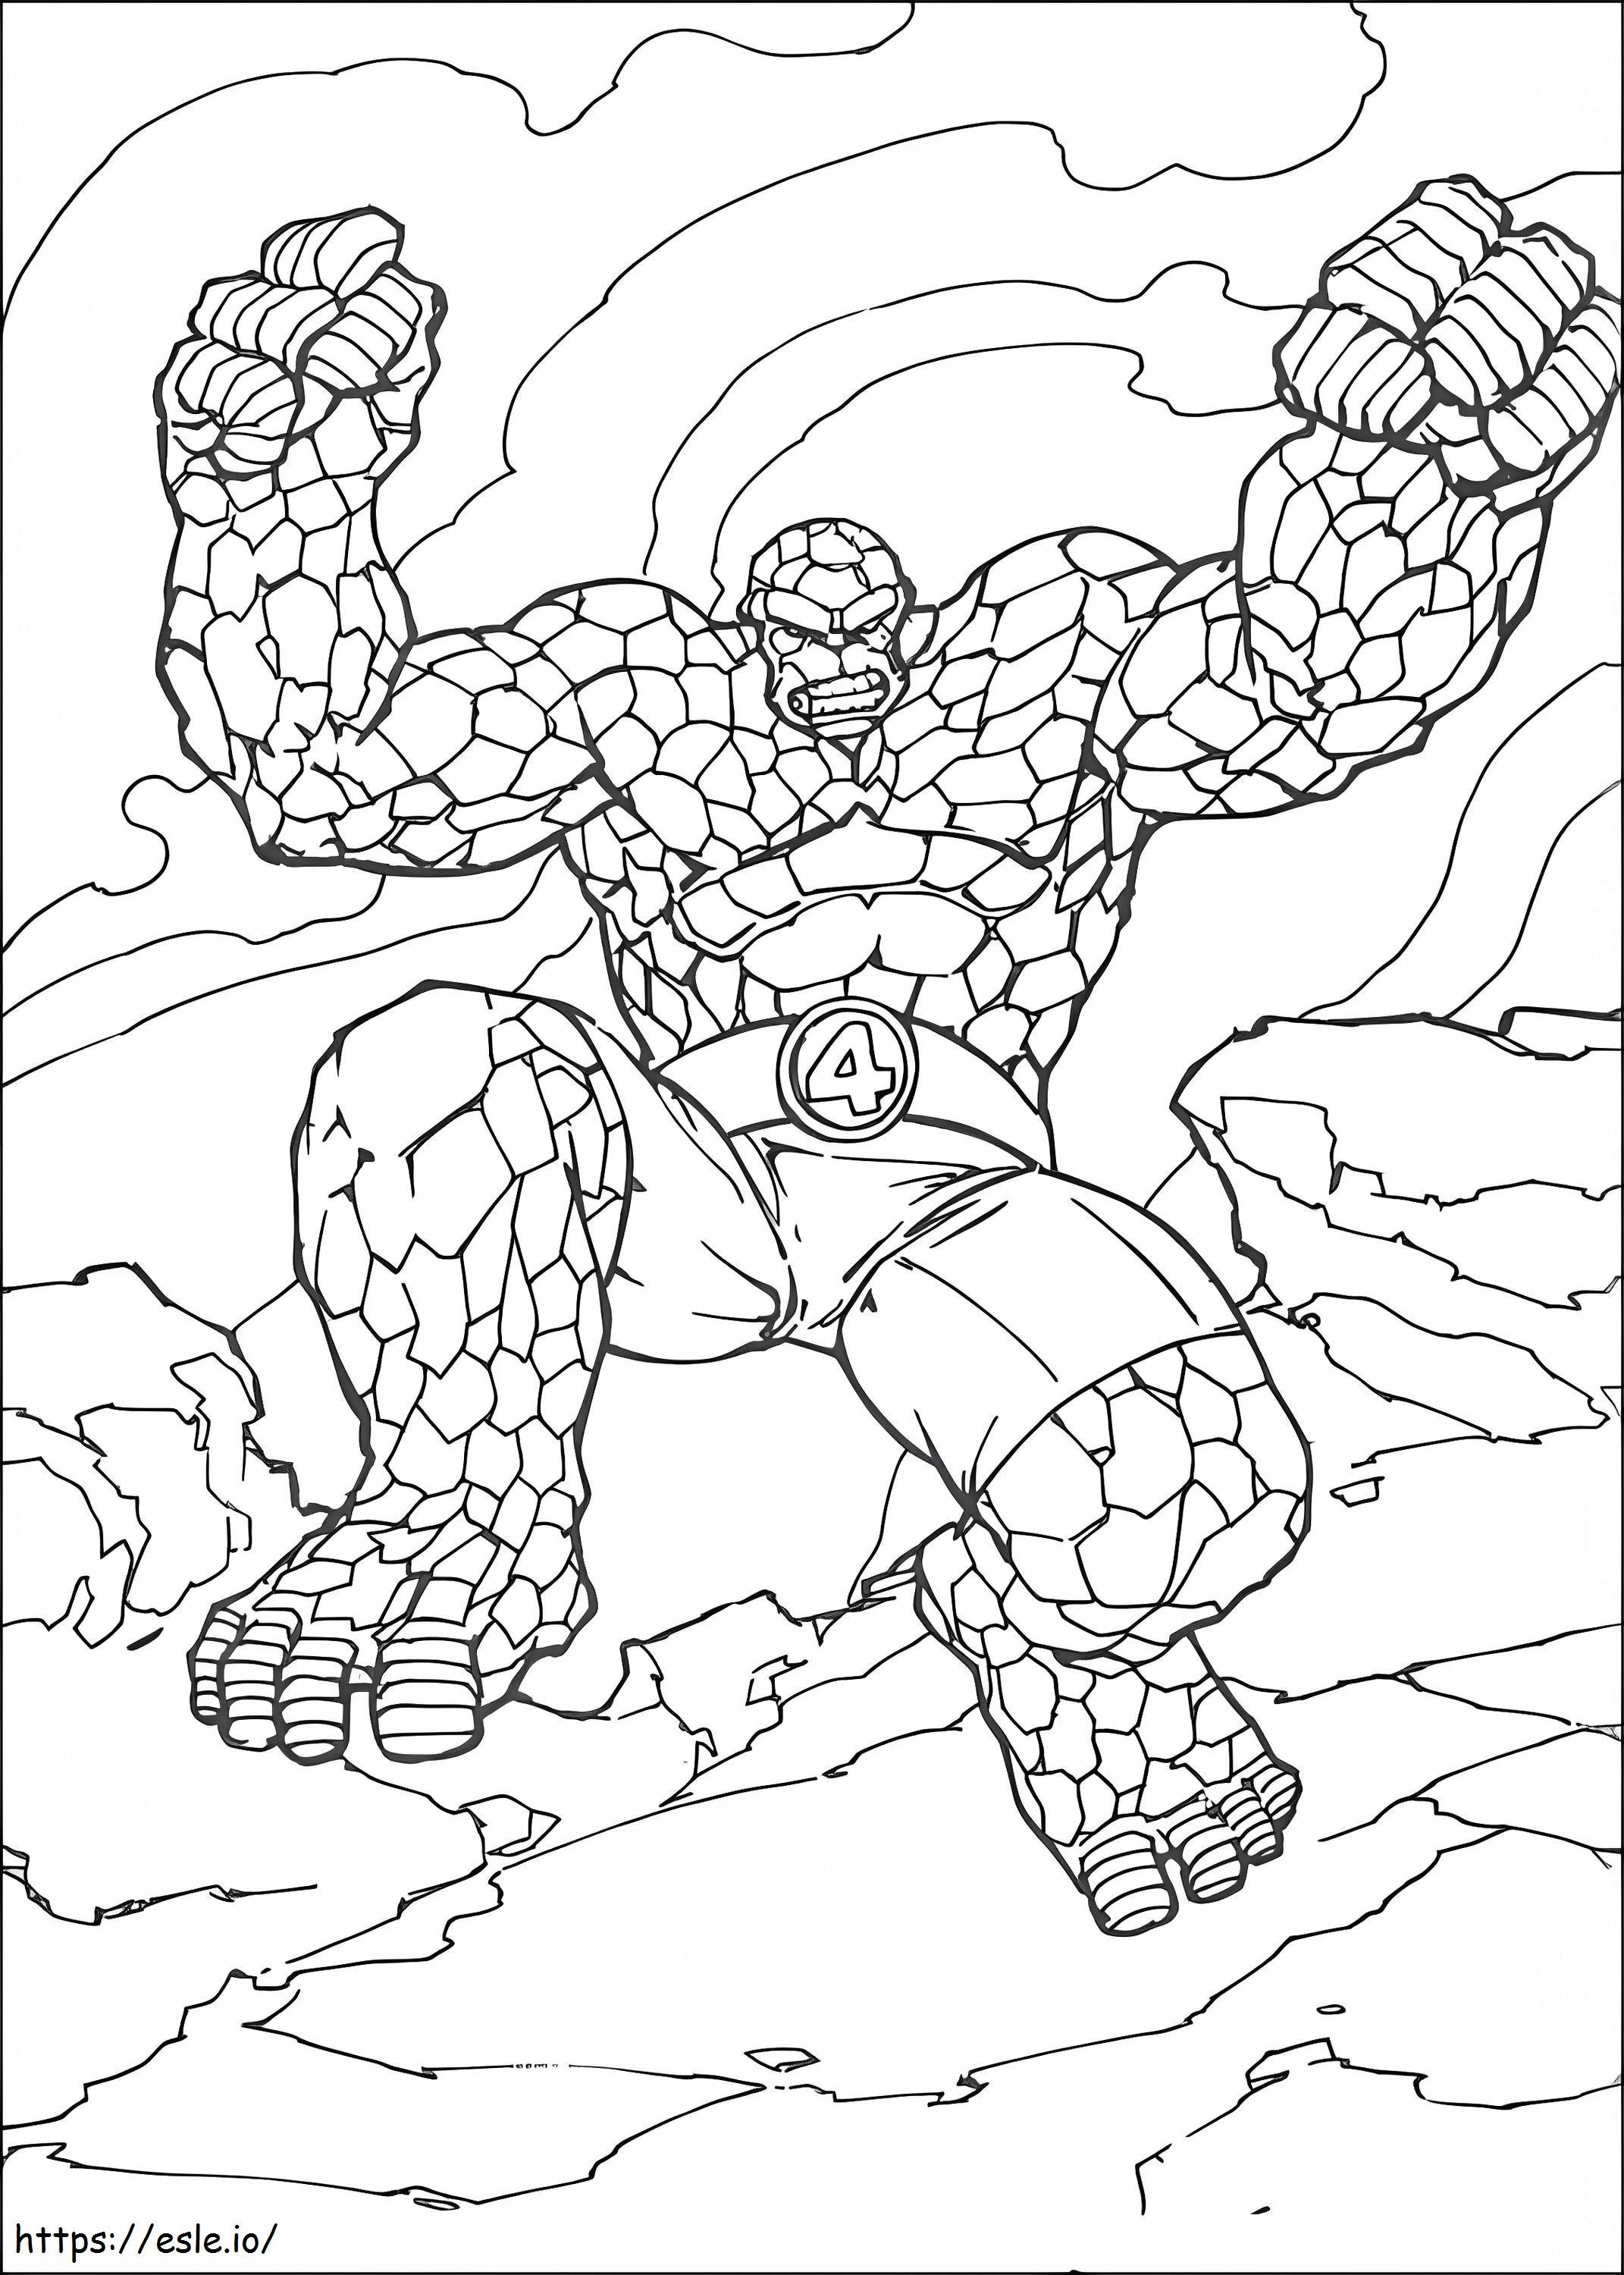 The Thing Fantastic Four coloring page